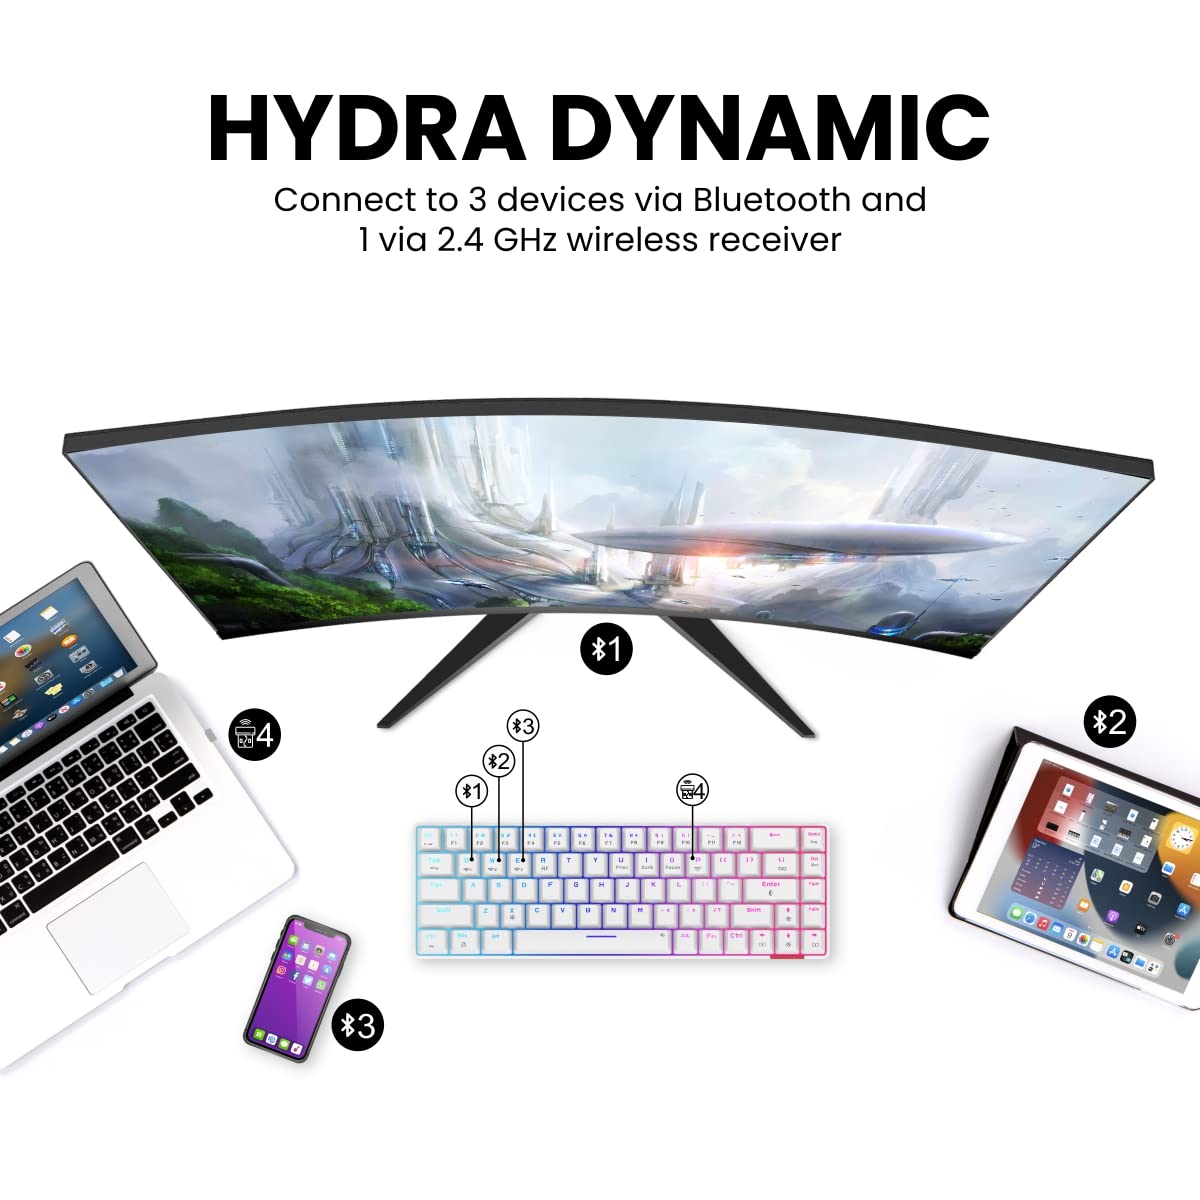 Portronics Hydra 10 Mechanical Wireless Gaming Keyboard with Bluetooth 5.0 + Wi-Fi 2.4 GHz, RGB Lights 16.8 Million Colors, Type C Charging, Compatible with PCs, Smartphones and Tablets(White)